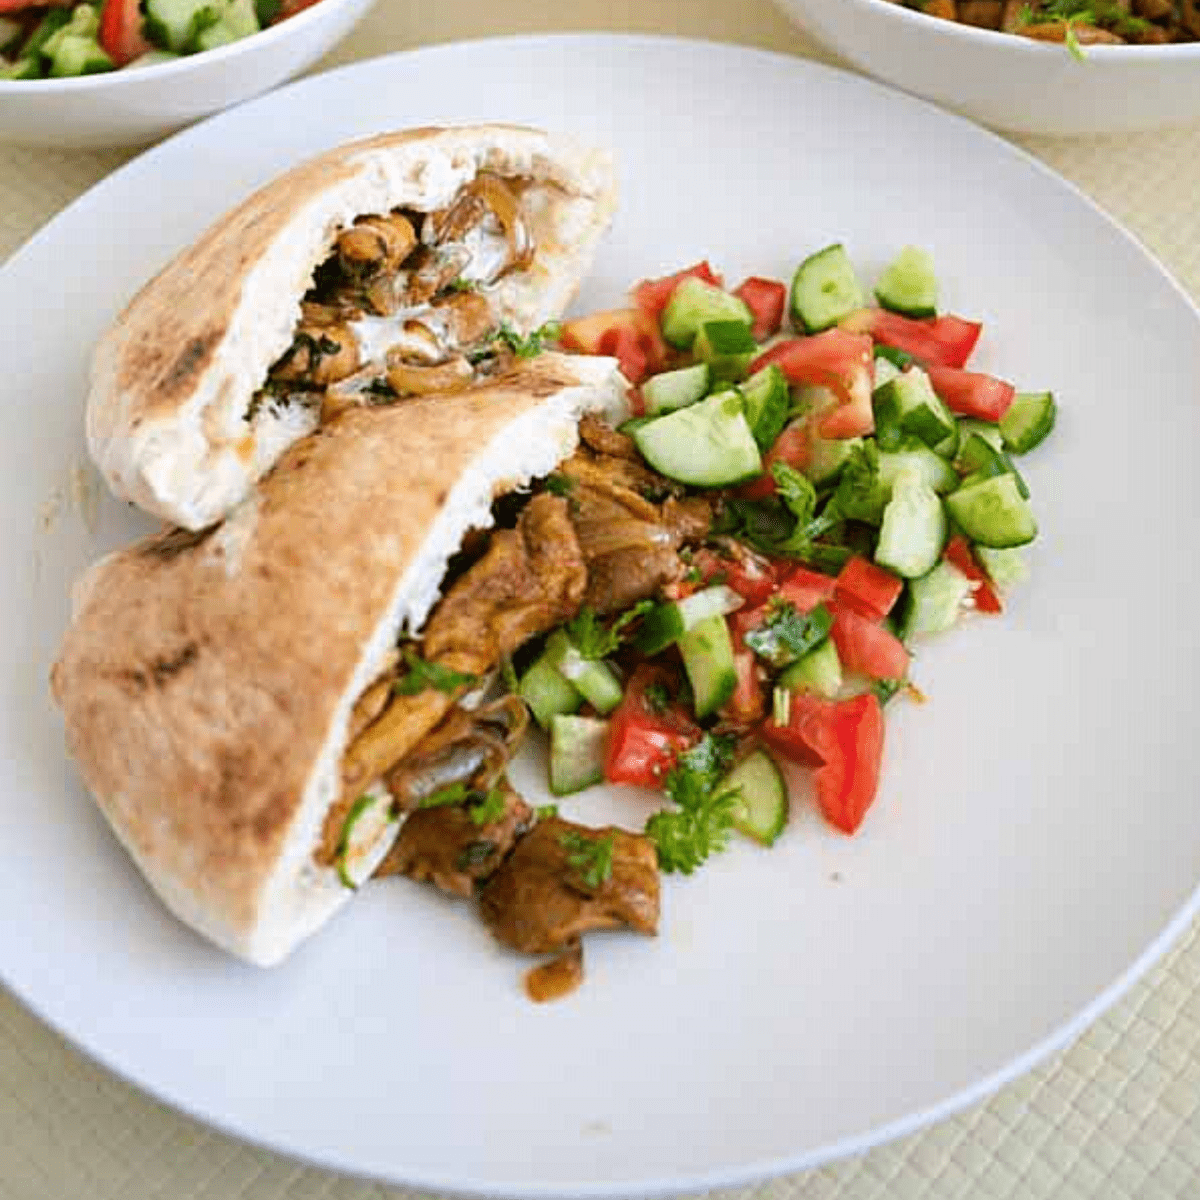 A plate with shawarma and salad with tahinis sauce.